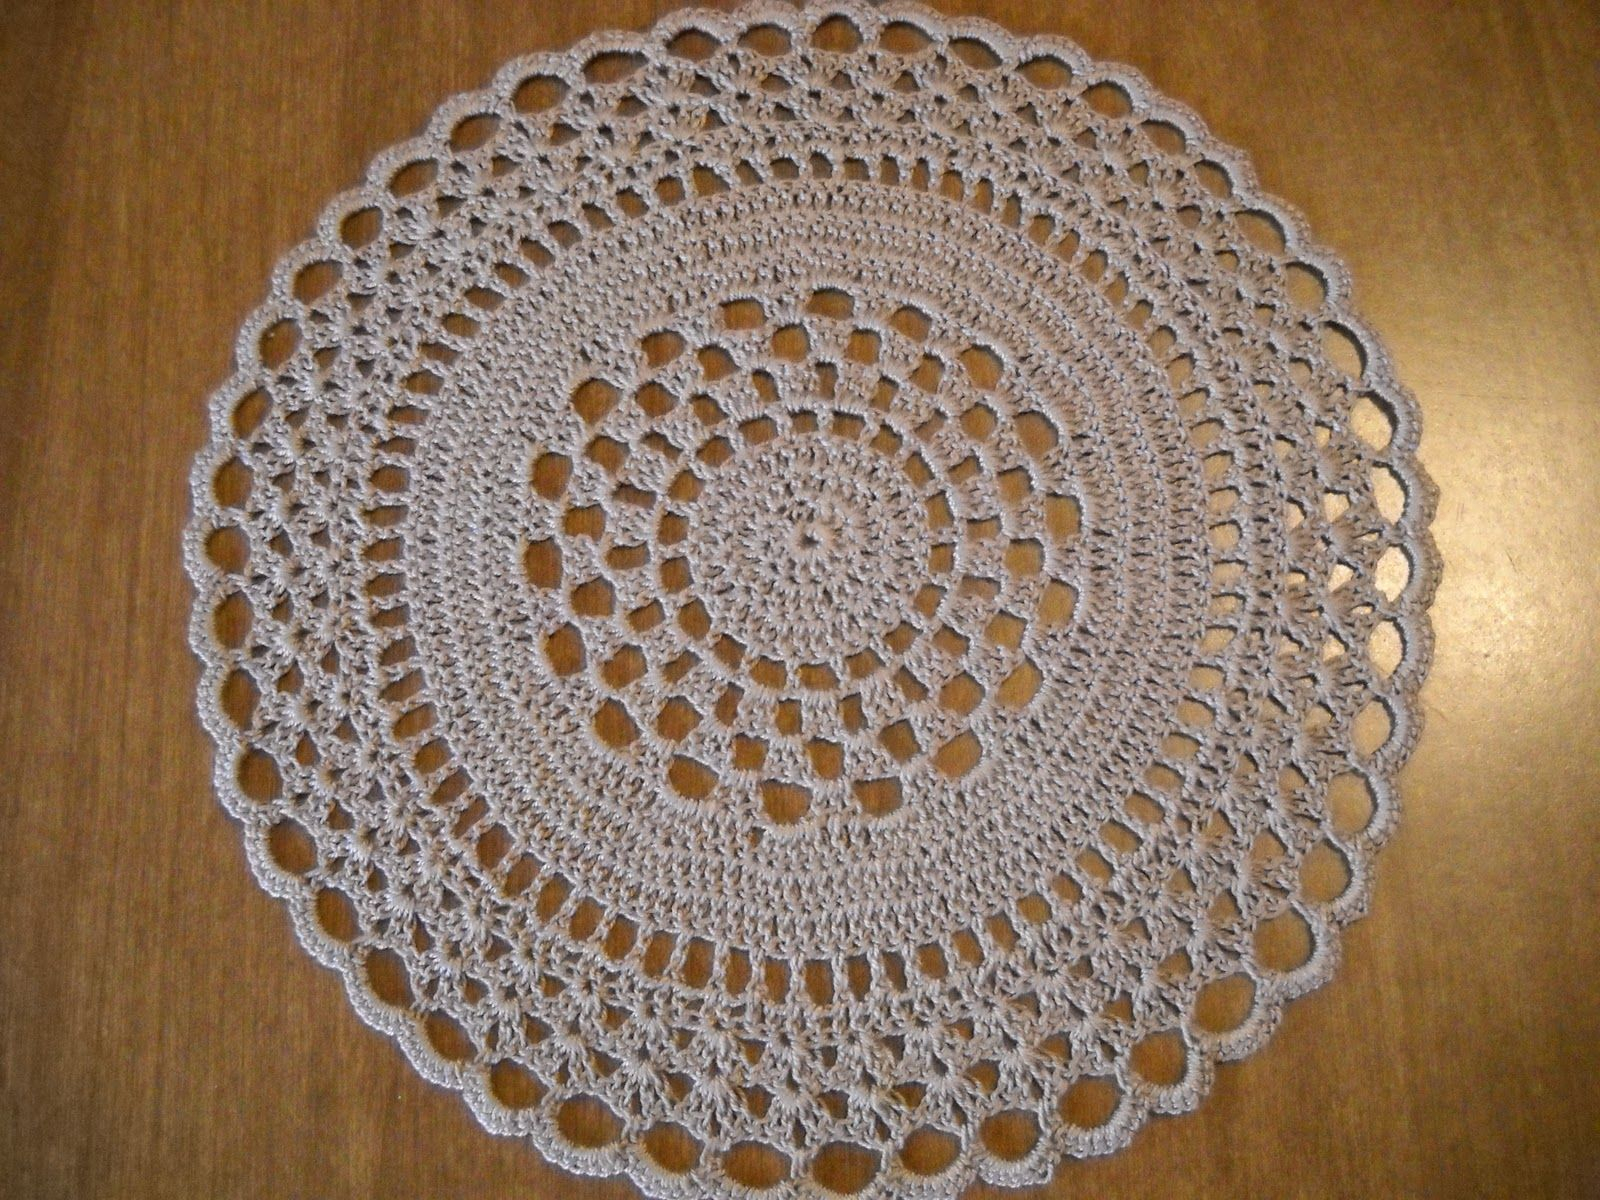 Crochet Centerpiece Pattern Dress Your Holiday Table With Free Crochet Doily Patterns Nothing